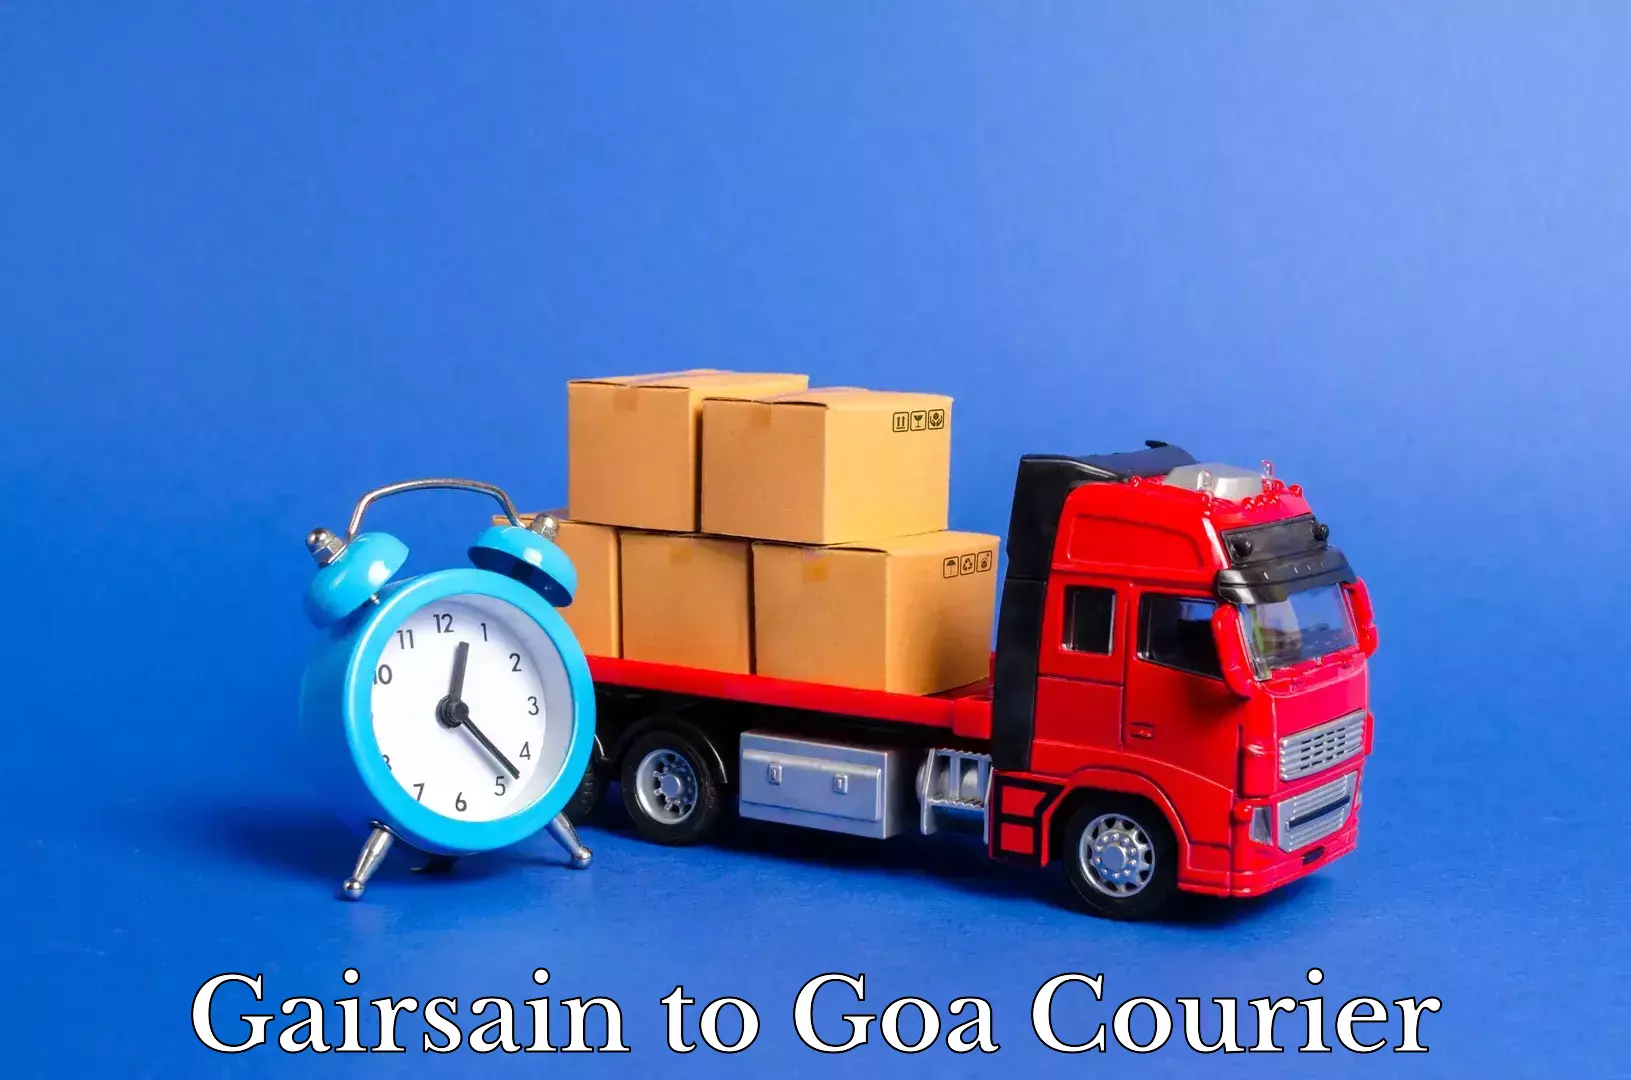 Professional packing services in Gairsain to Goa